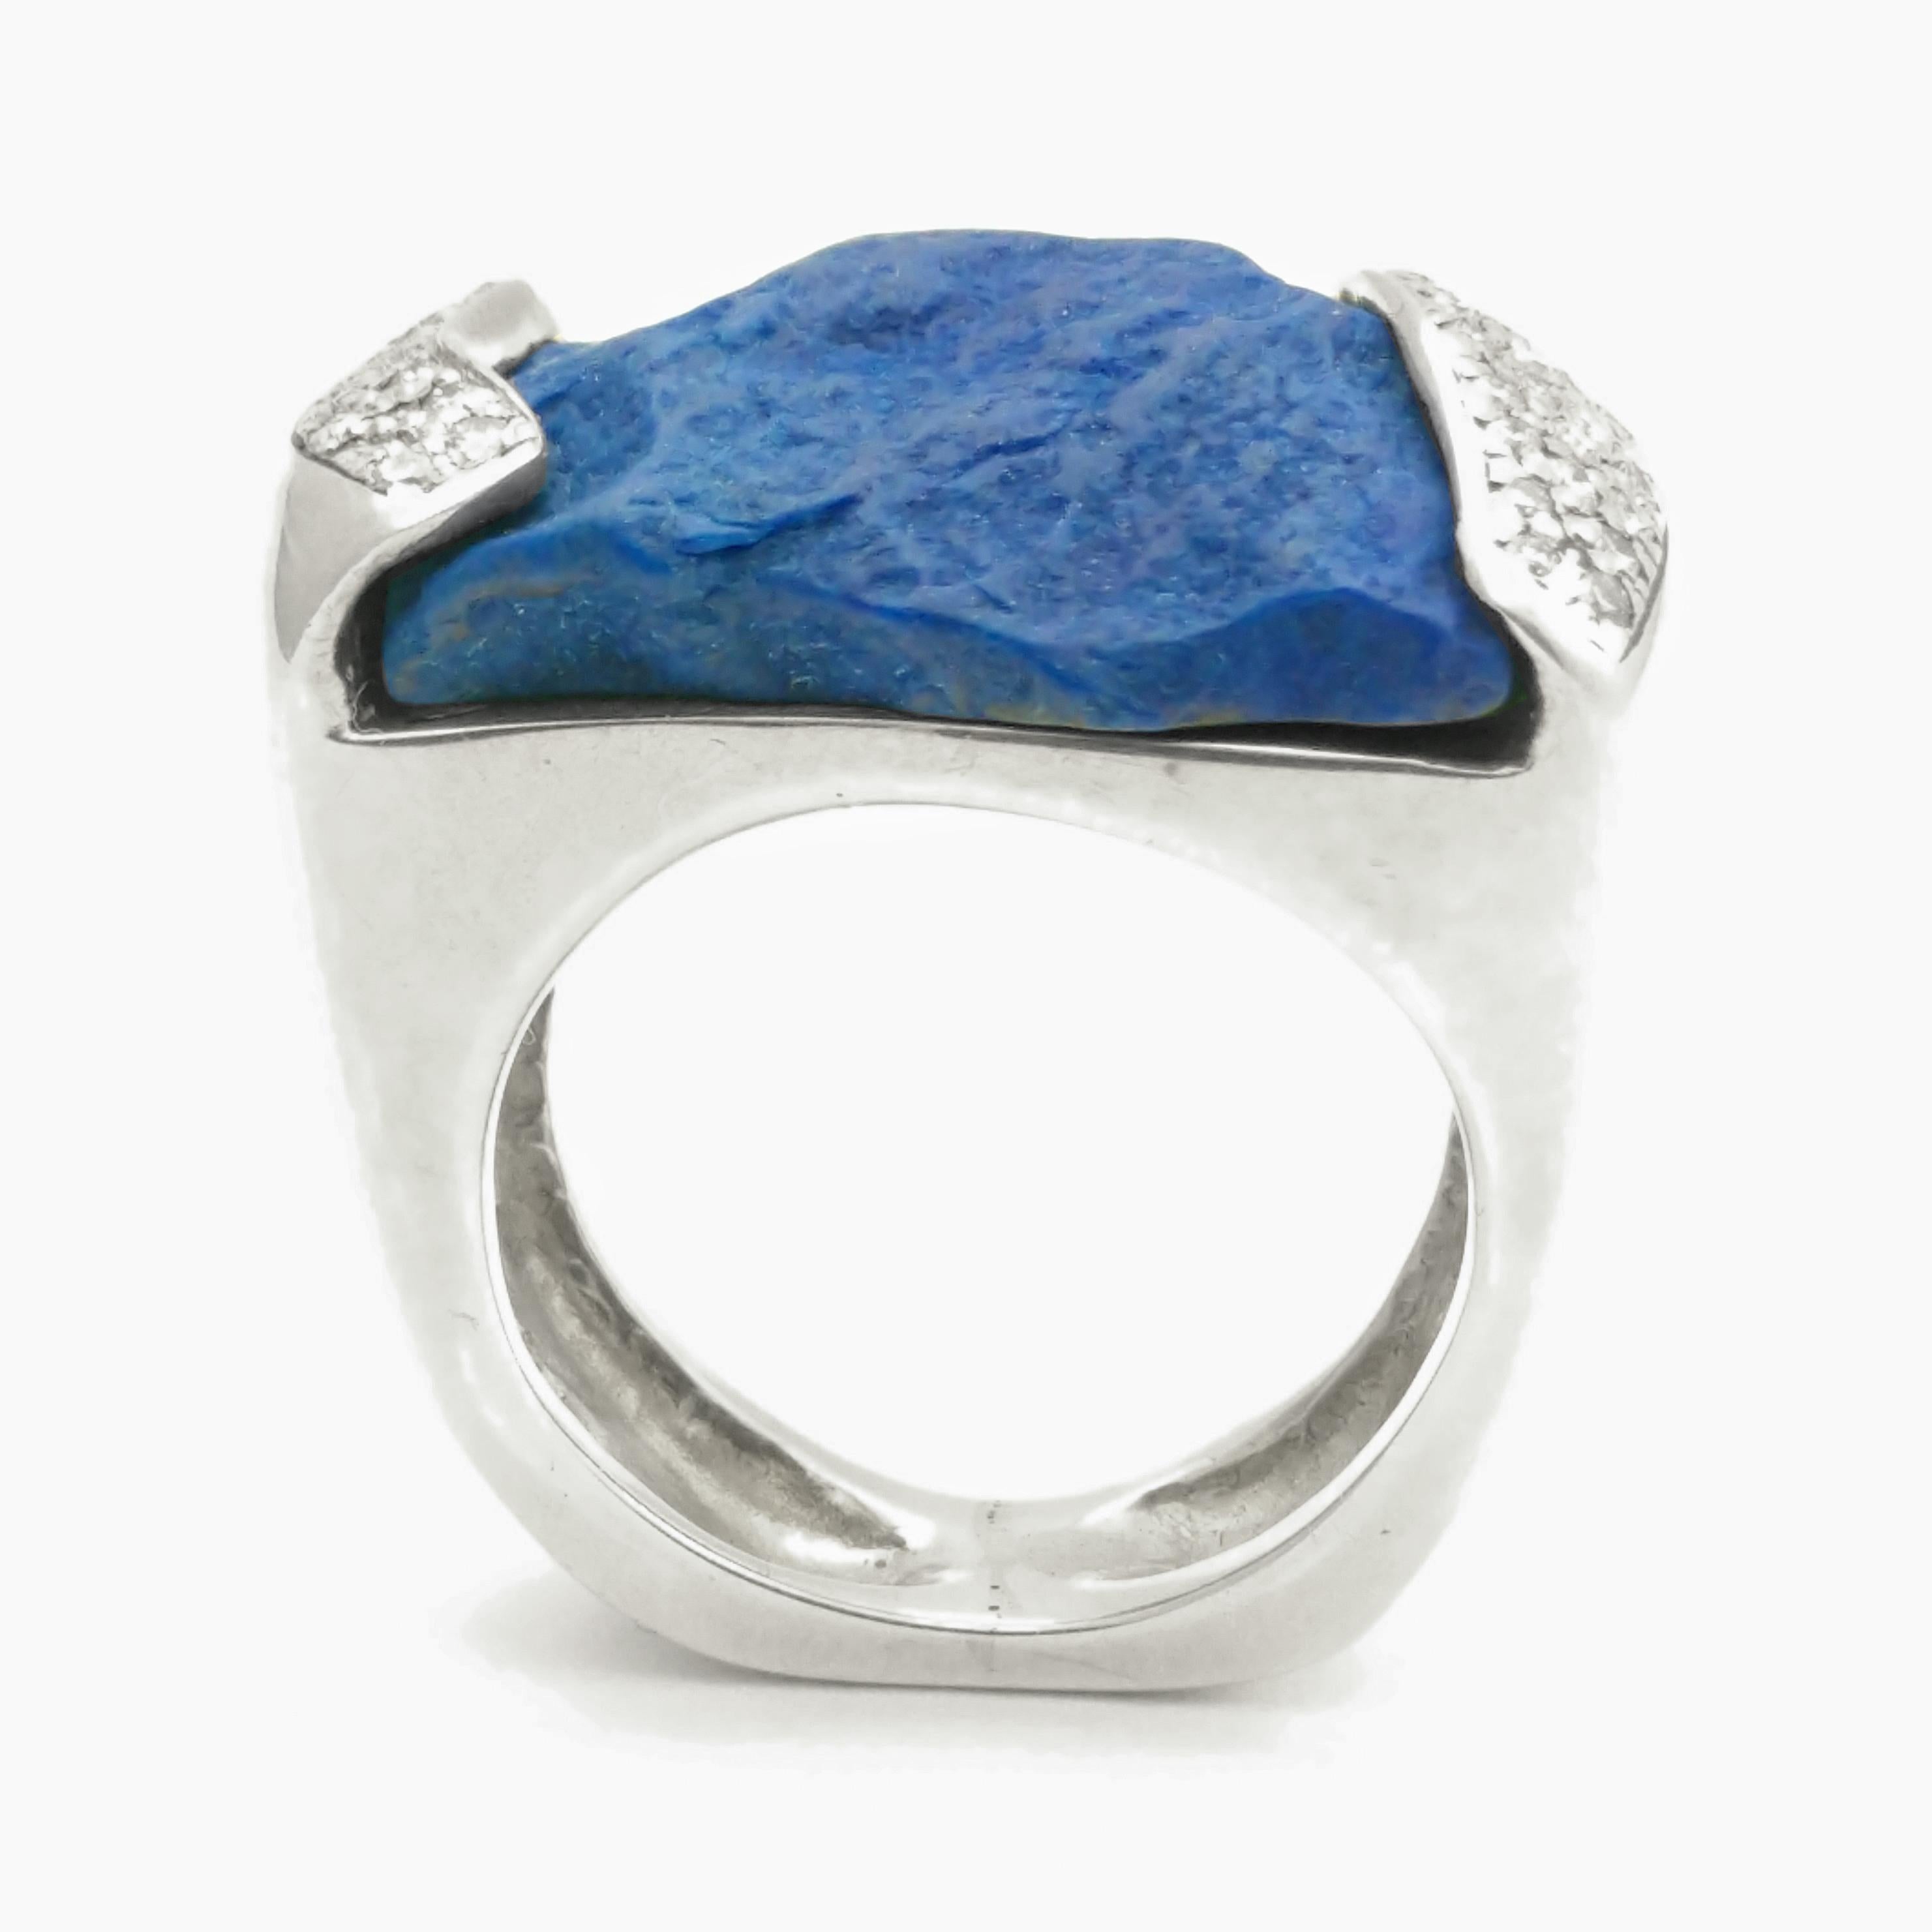 Round Cut Rough Lapis and Pave Diamonds Statement Ring Stylish Western Look in Silver For Sale